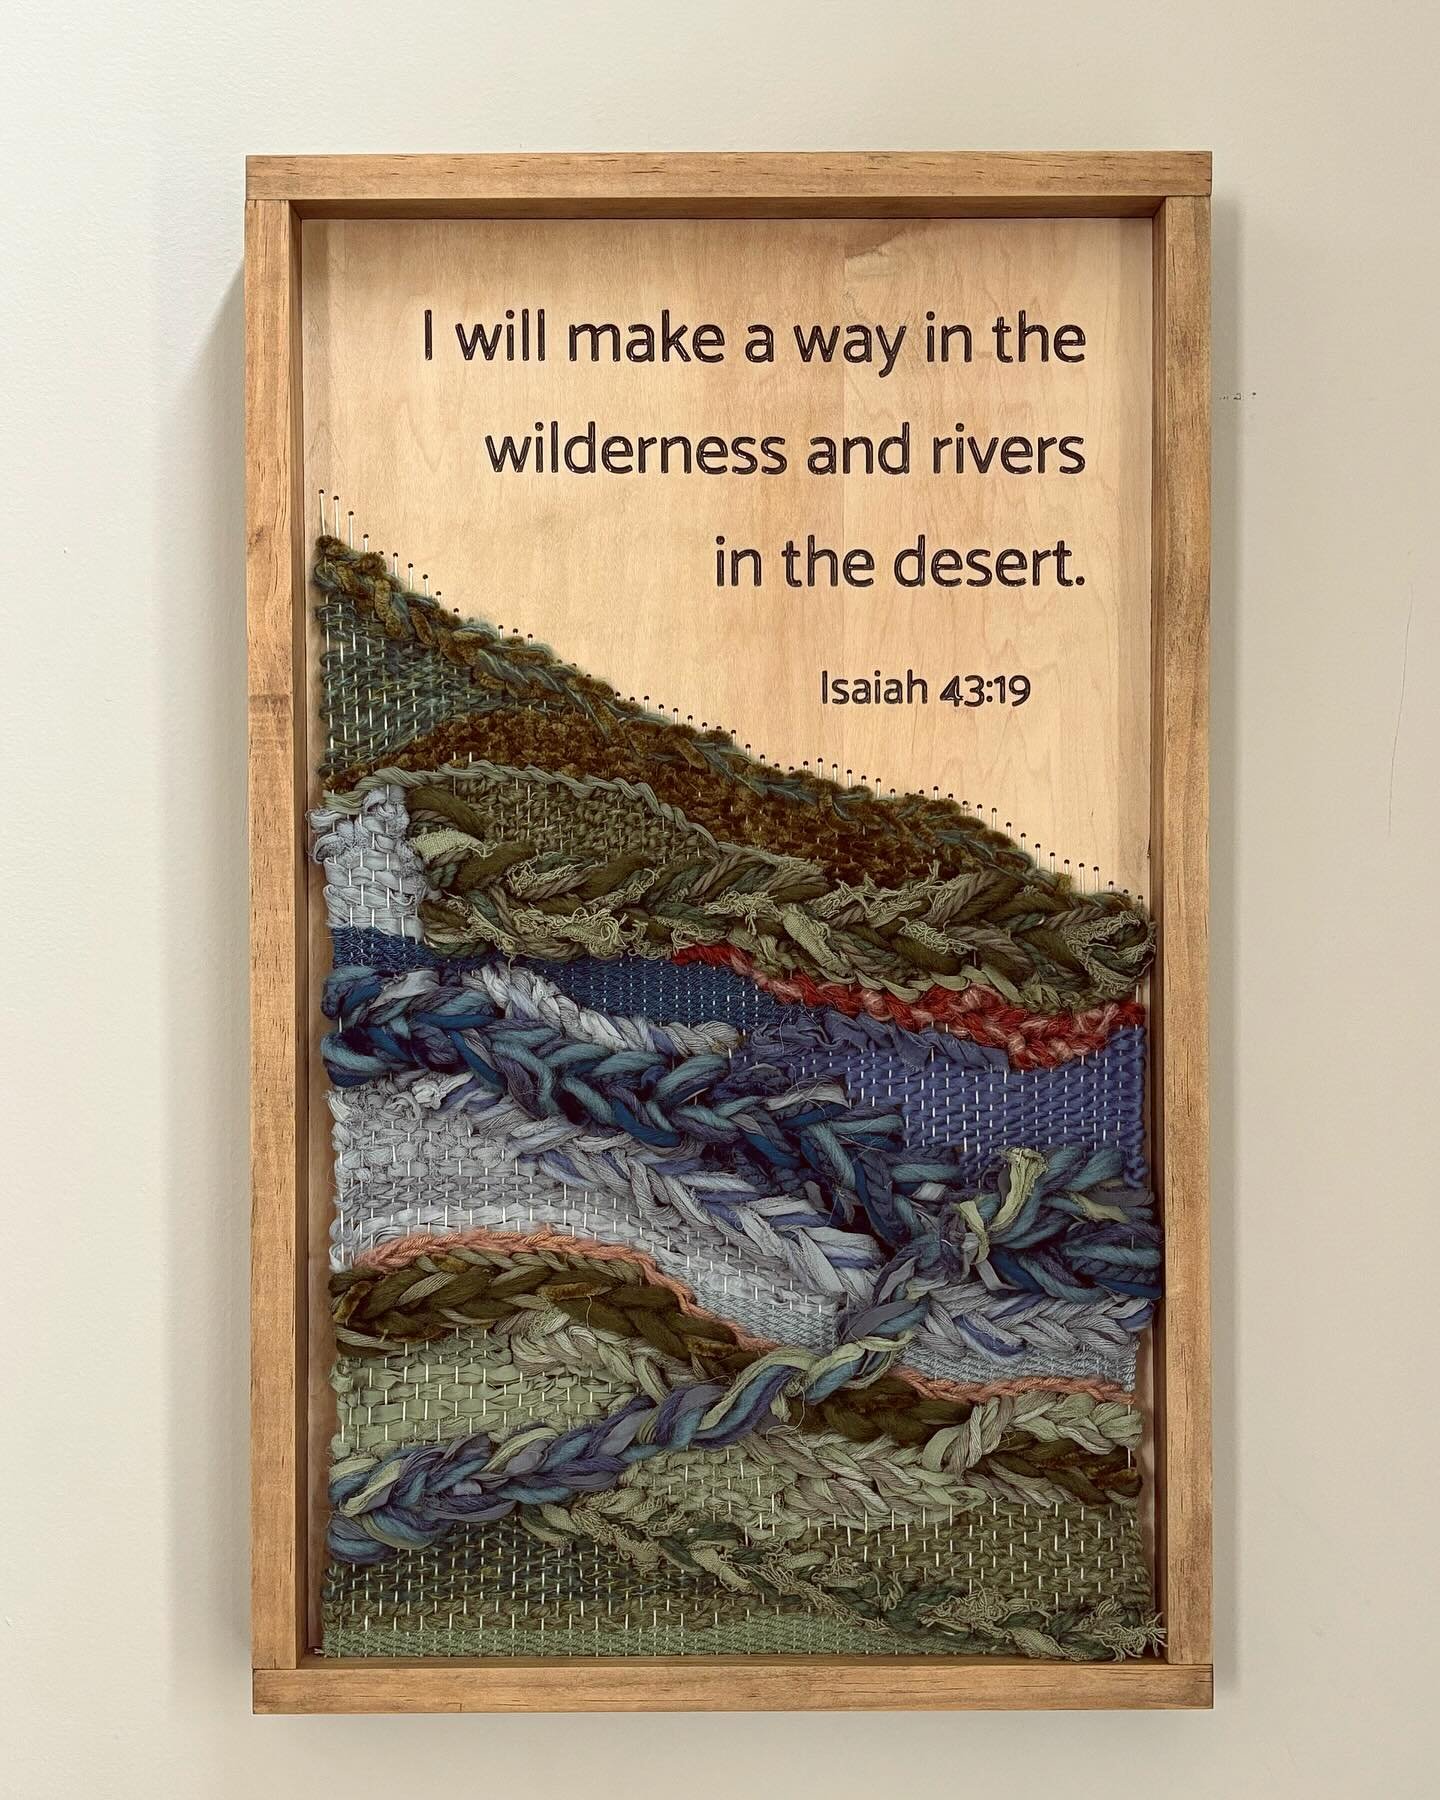 &ldquo;Behold, I am doing a new thing; even now it is coming, do you not see it? I will make a way in the wilderness and rivers in the desert.&rdquo;
‭‭Isaiah‬ ‭43‬:‭19‬ ‭

#3pinesmercantile #isaiah4319 #wovenart #wallhanging #homedecor